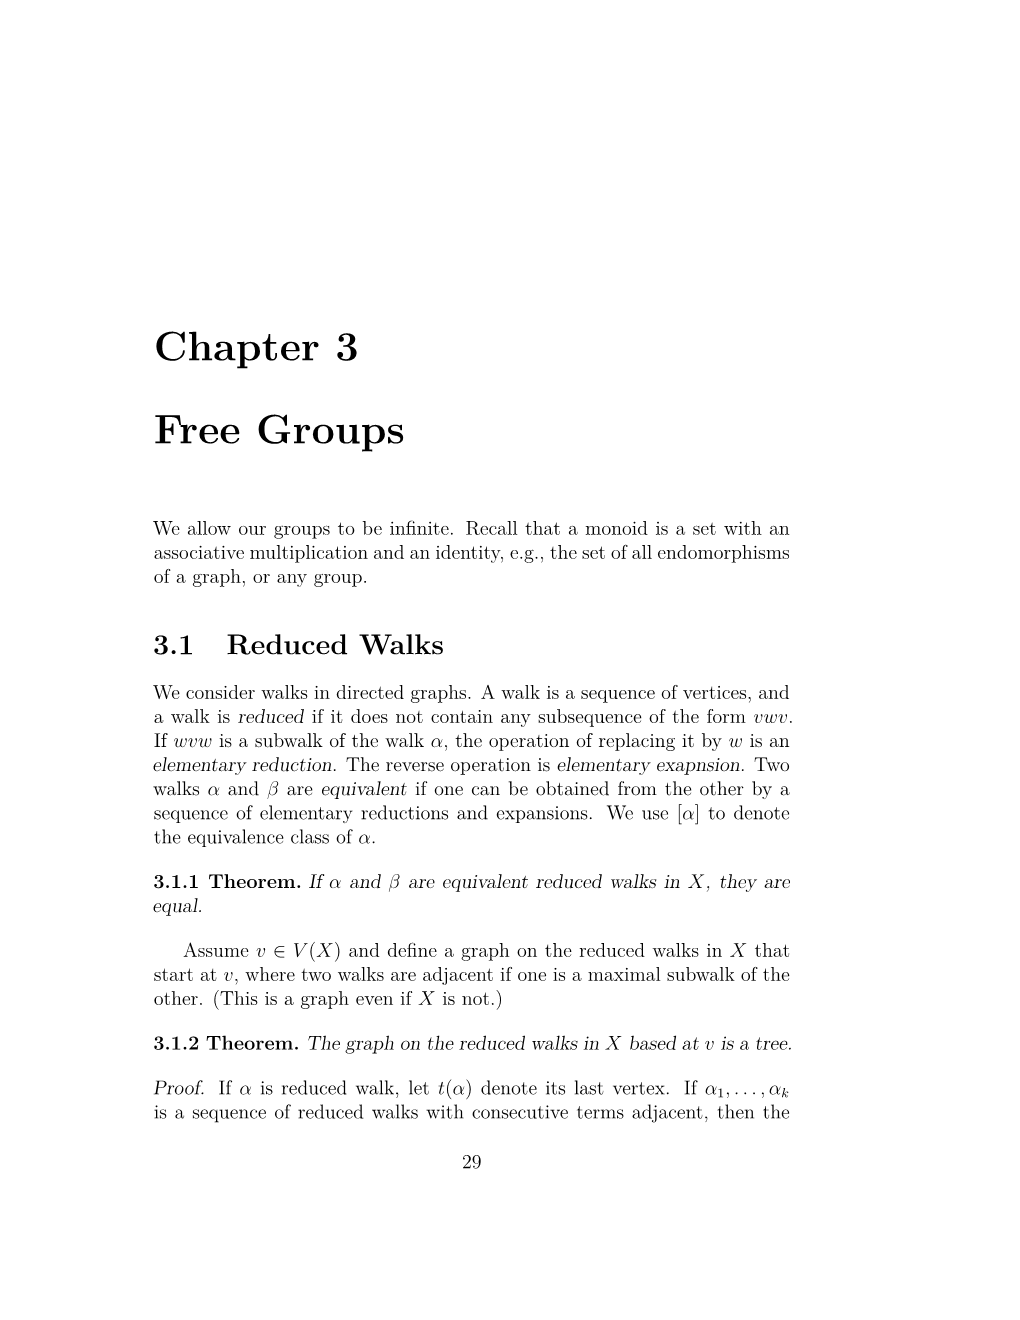 Chapter 3 Free Groups